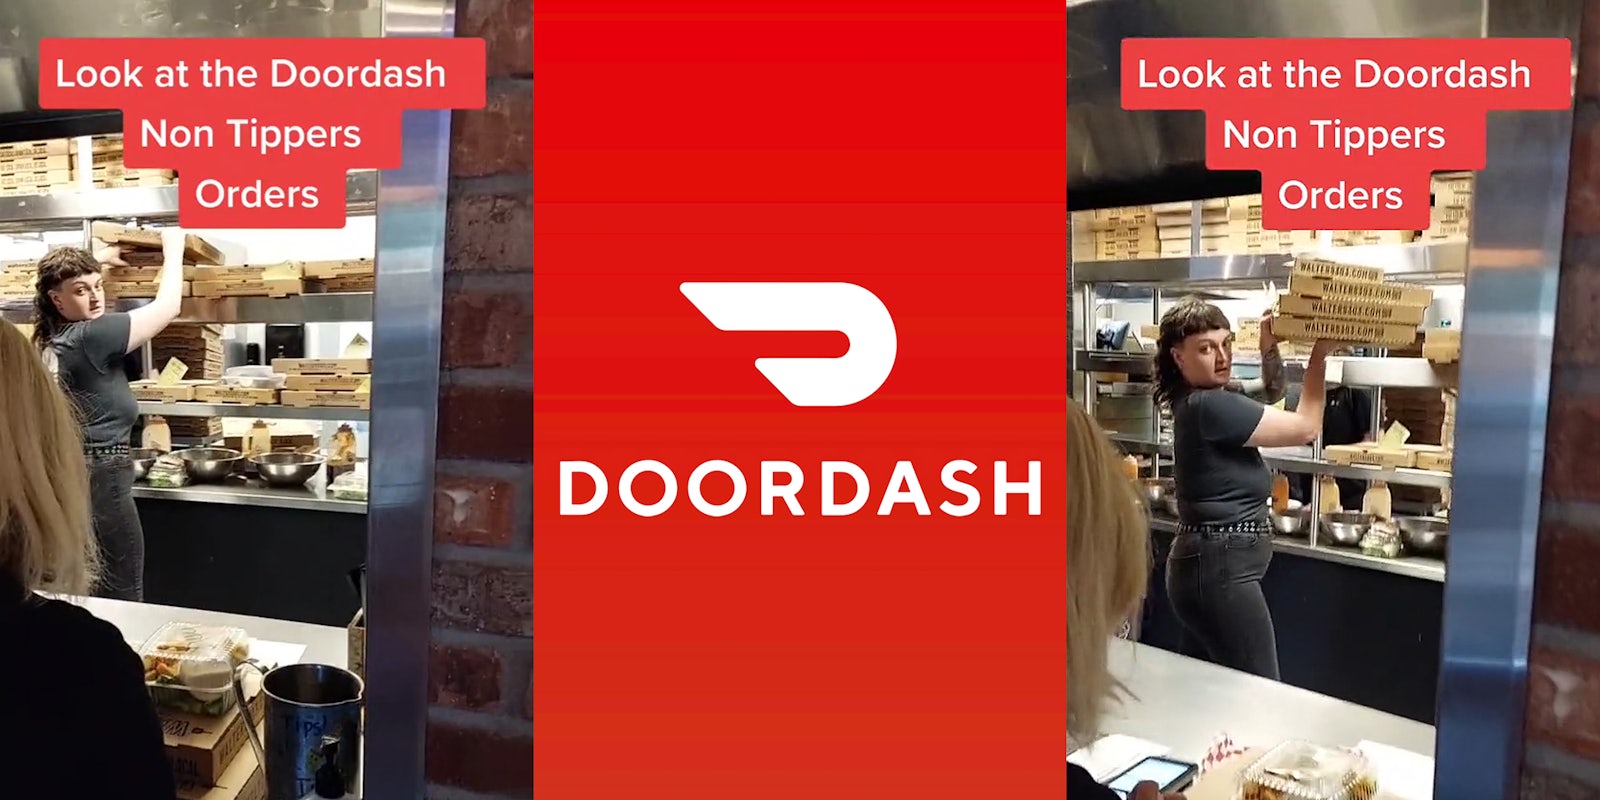 person grabbing pizza box from rack caption 'Look at the DoorDash Non Tippers Orders' (l) DoorDash logo on red background (c) person grabbing pizza boxes from rack caption 'Look at the DoorDash Non Tippers Orders' (r)